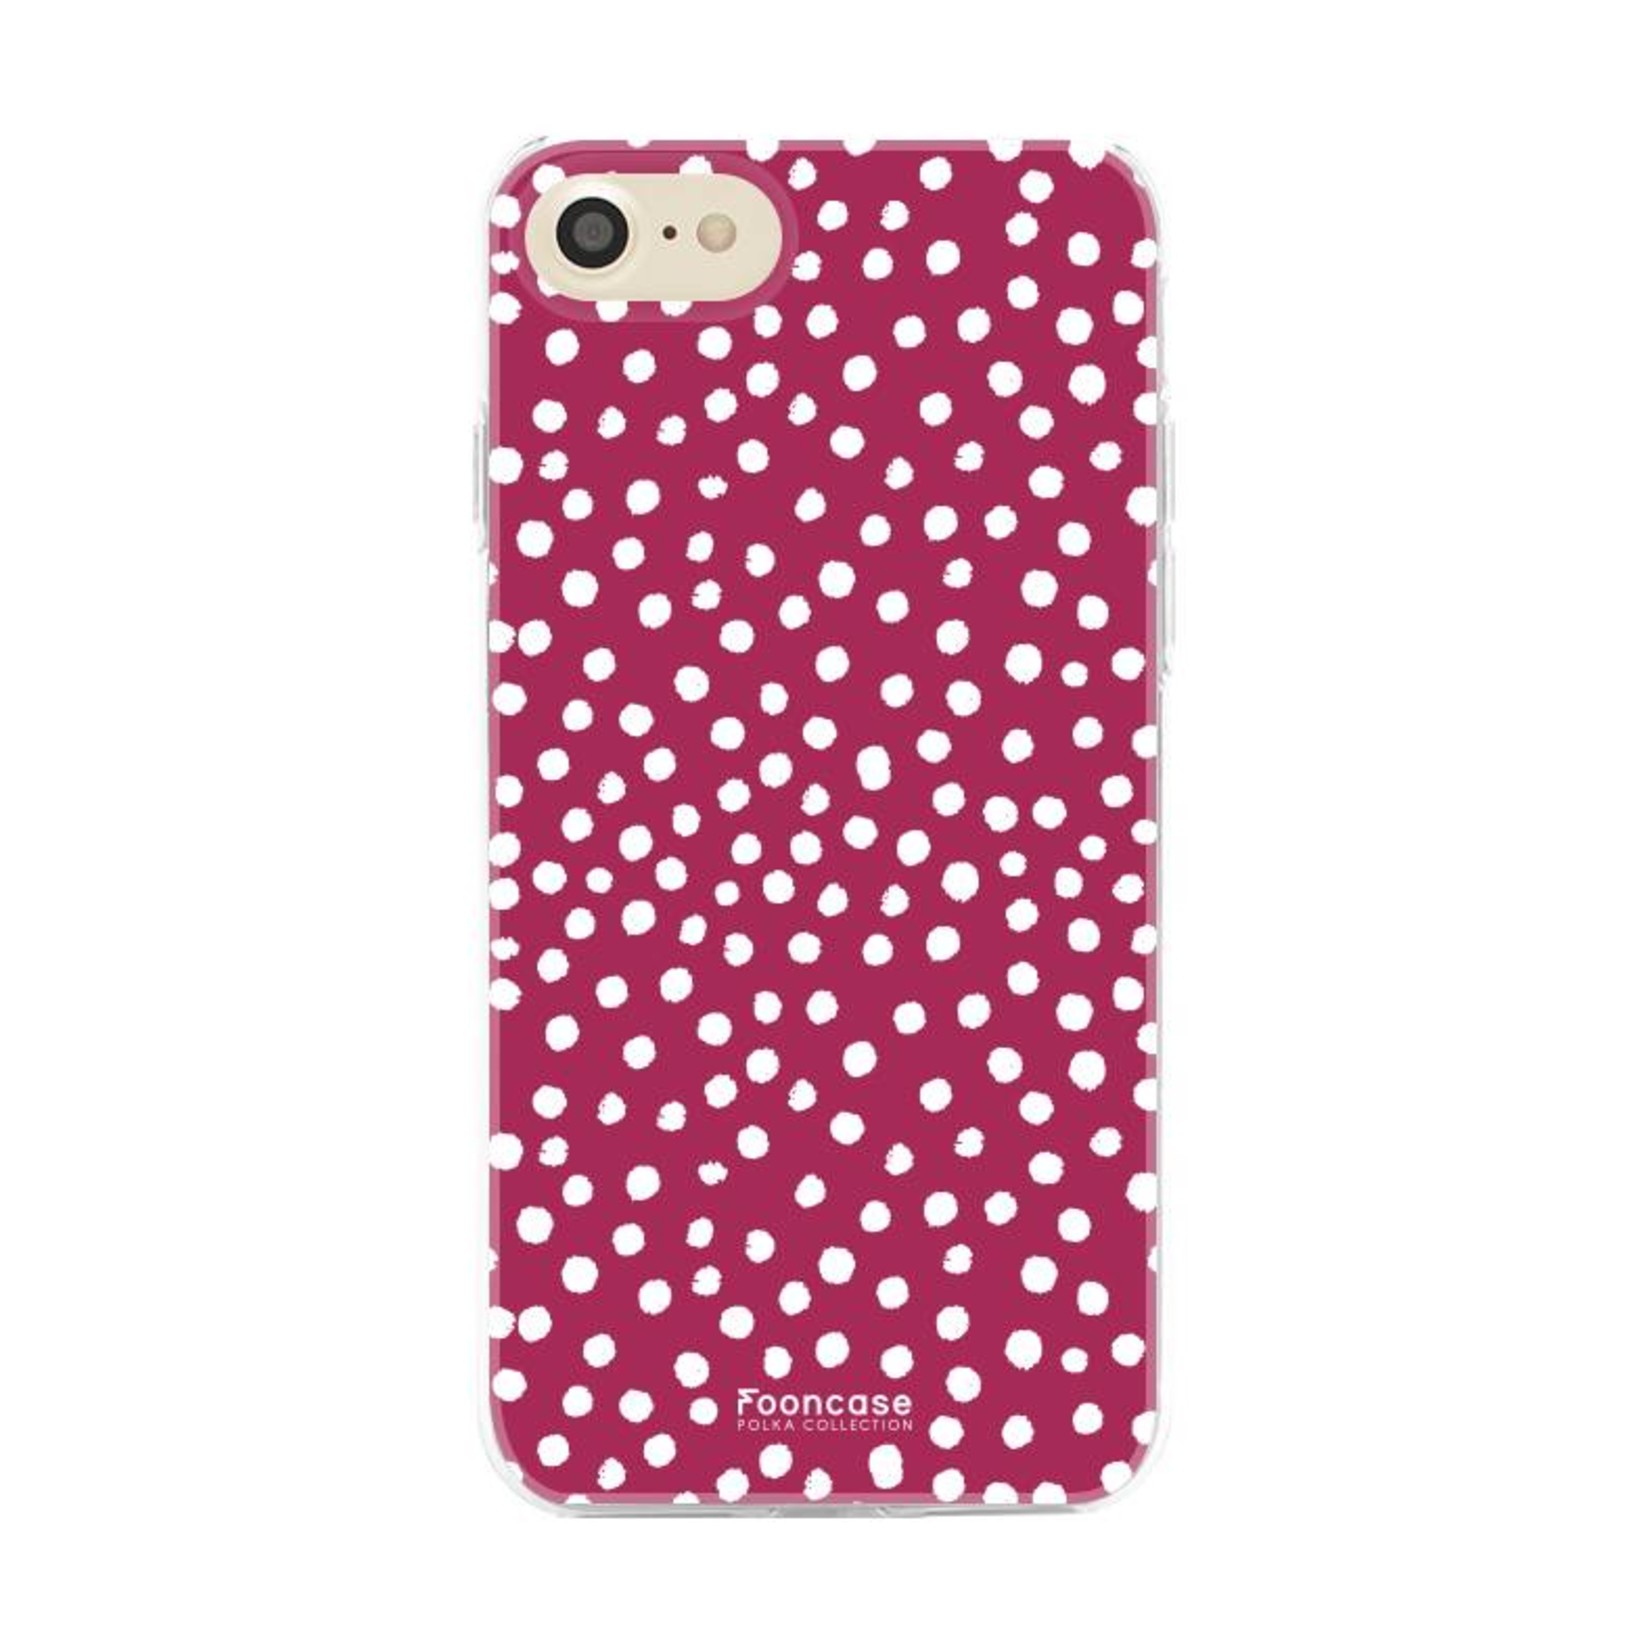 FOONCASE Iphone 7 - POLKA COLLECTION / Bordeaux Rot